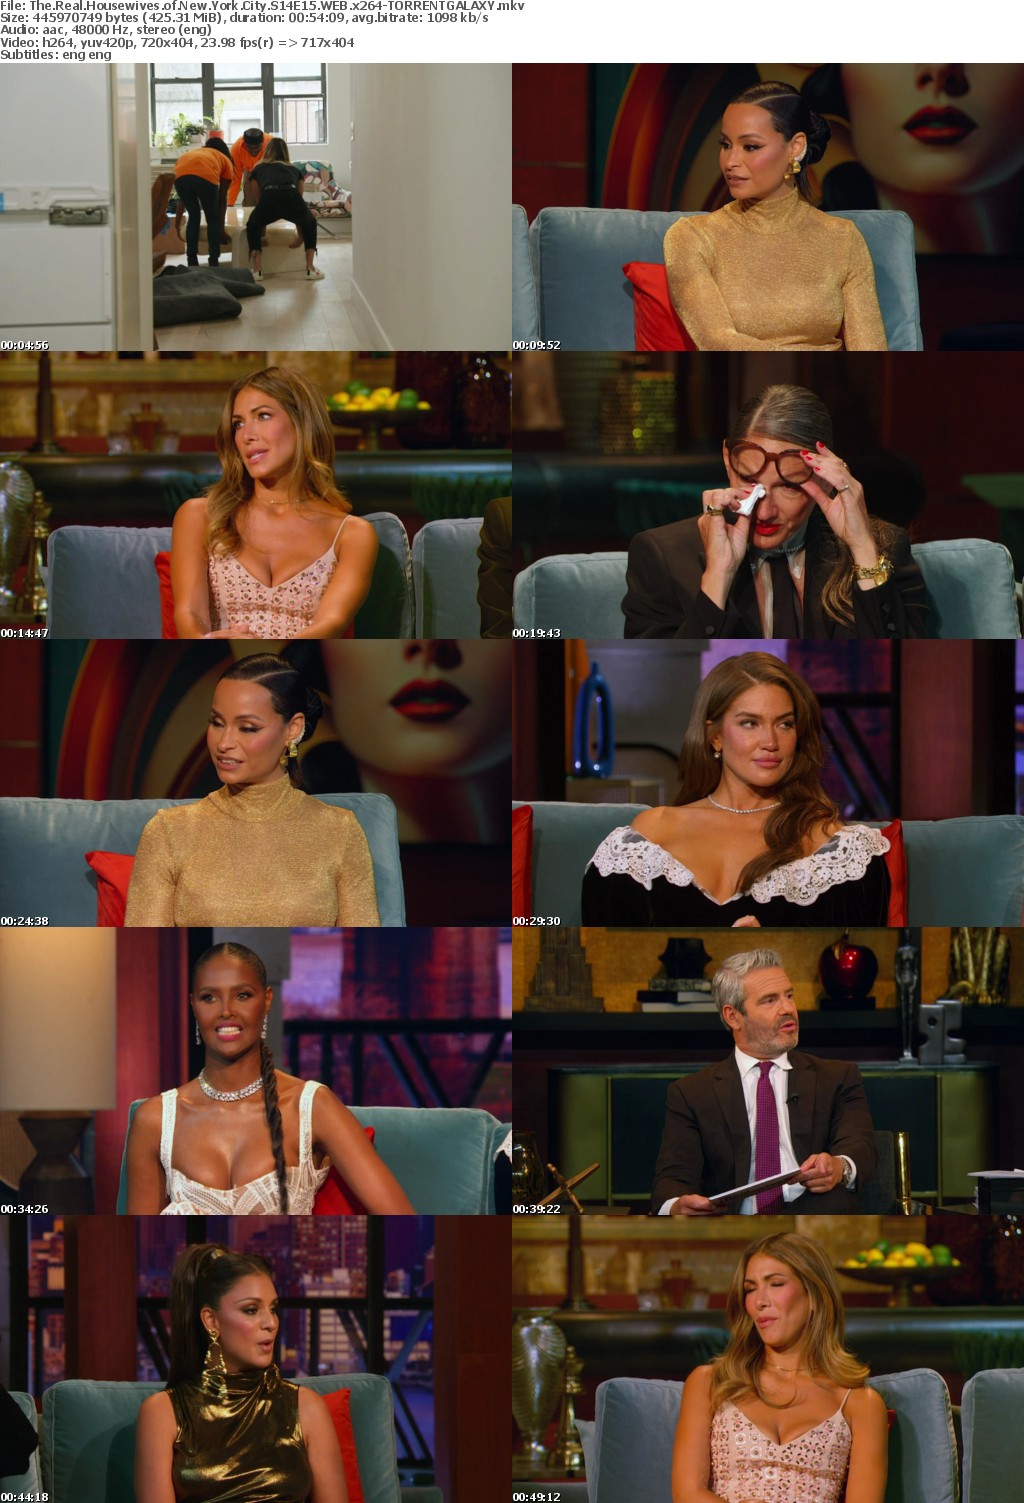 The Real Housewives of New York City S14E15 WEB x264-GALAXY